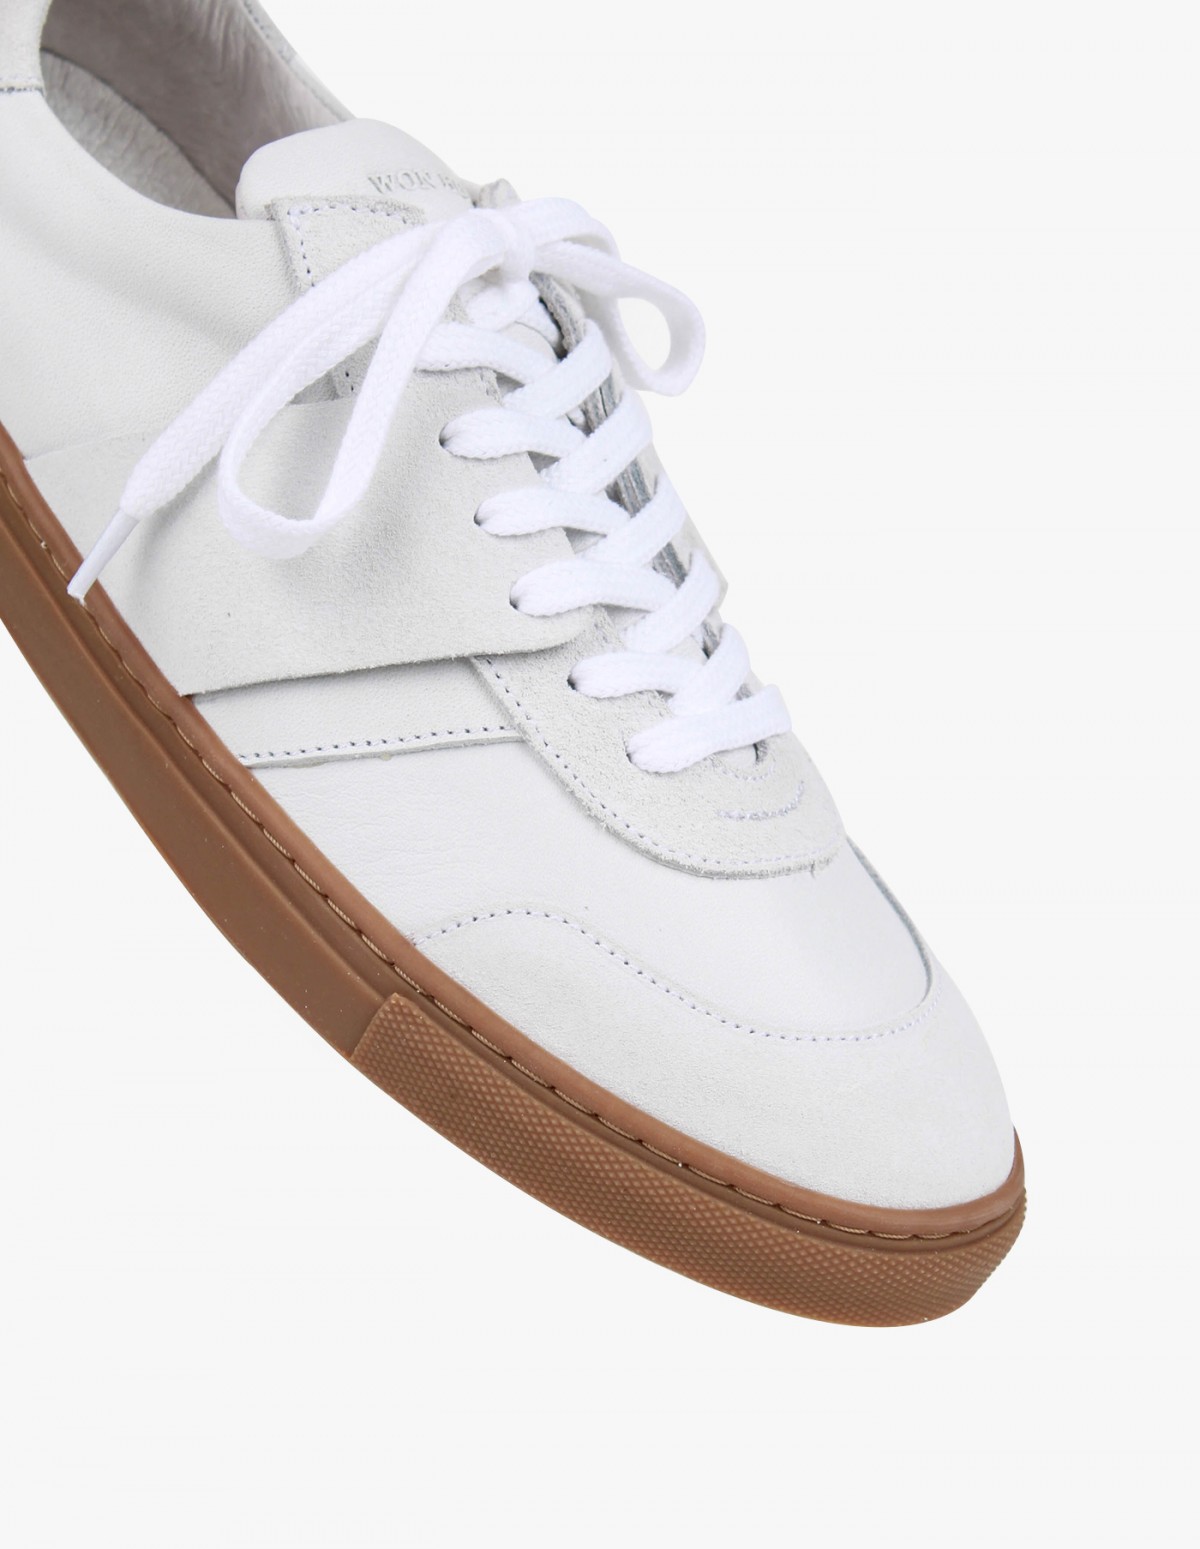 Won Hundred Renee in White Leather/Suede